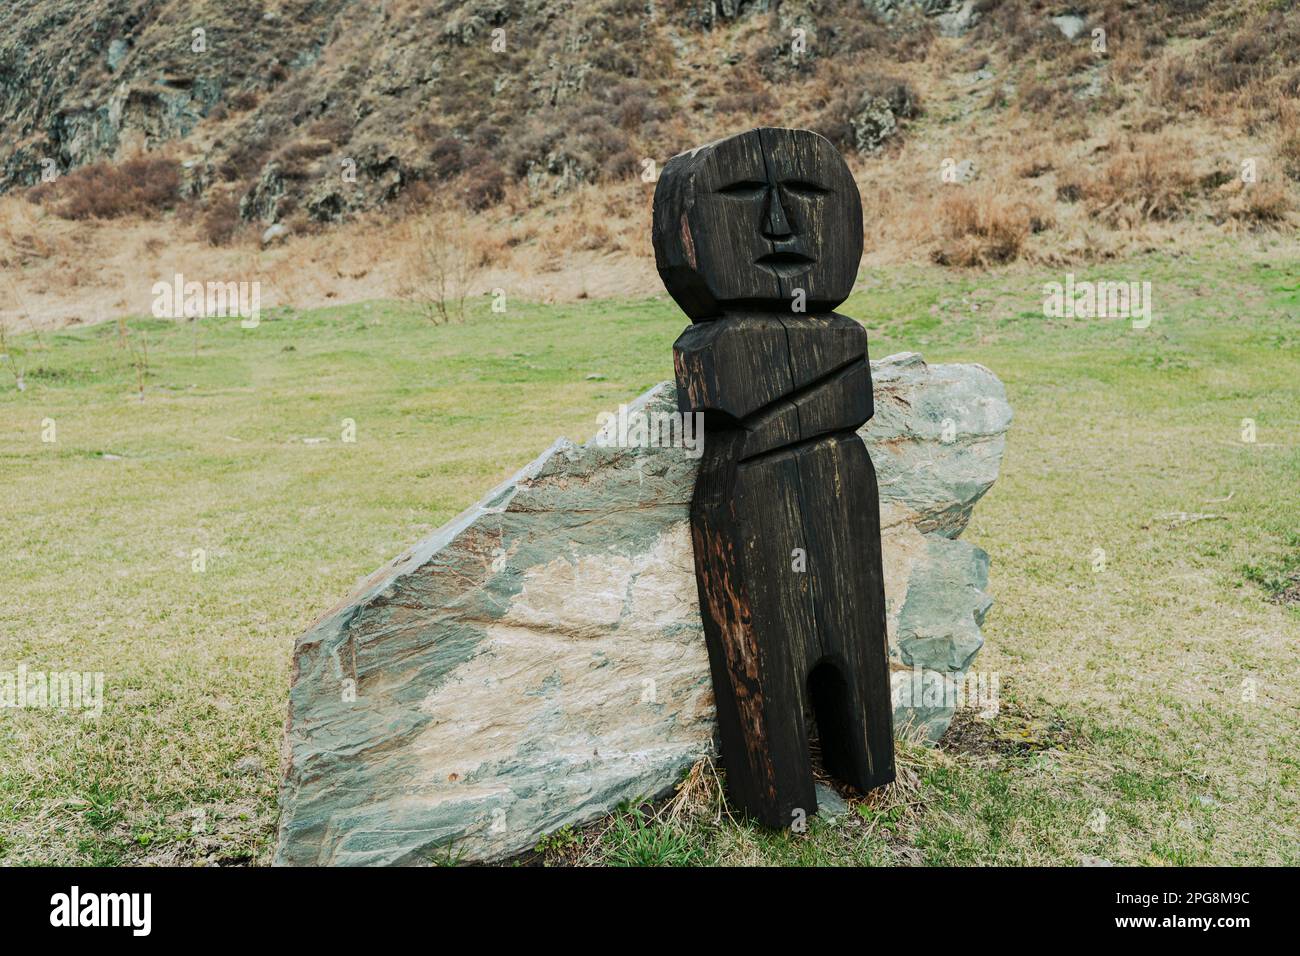 Ancient wooden statues for worship during paganism. A symbol of the worship of pagan tribes. Stock Photo